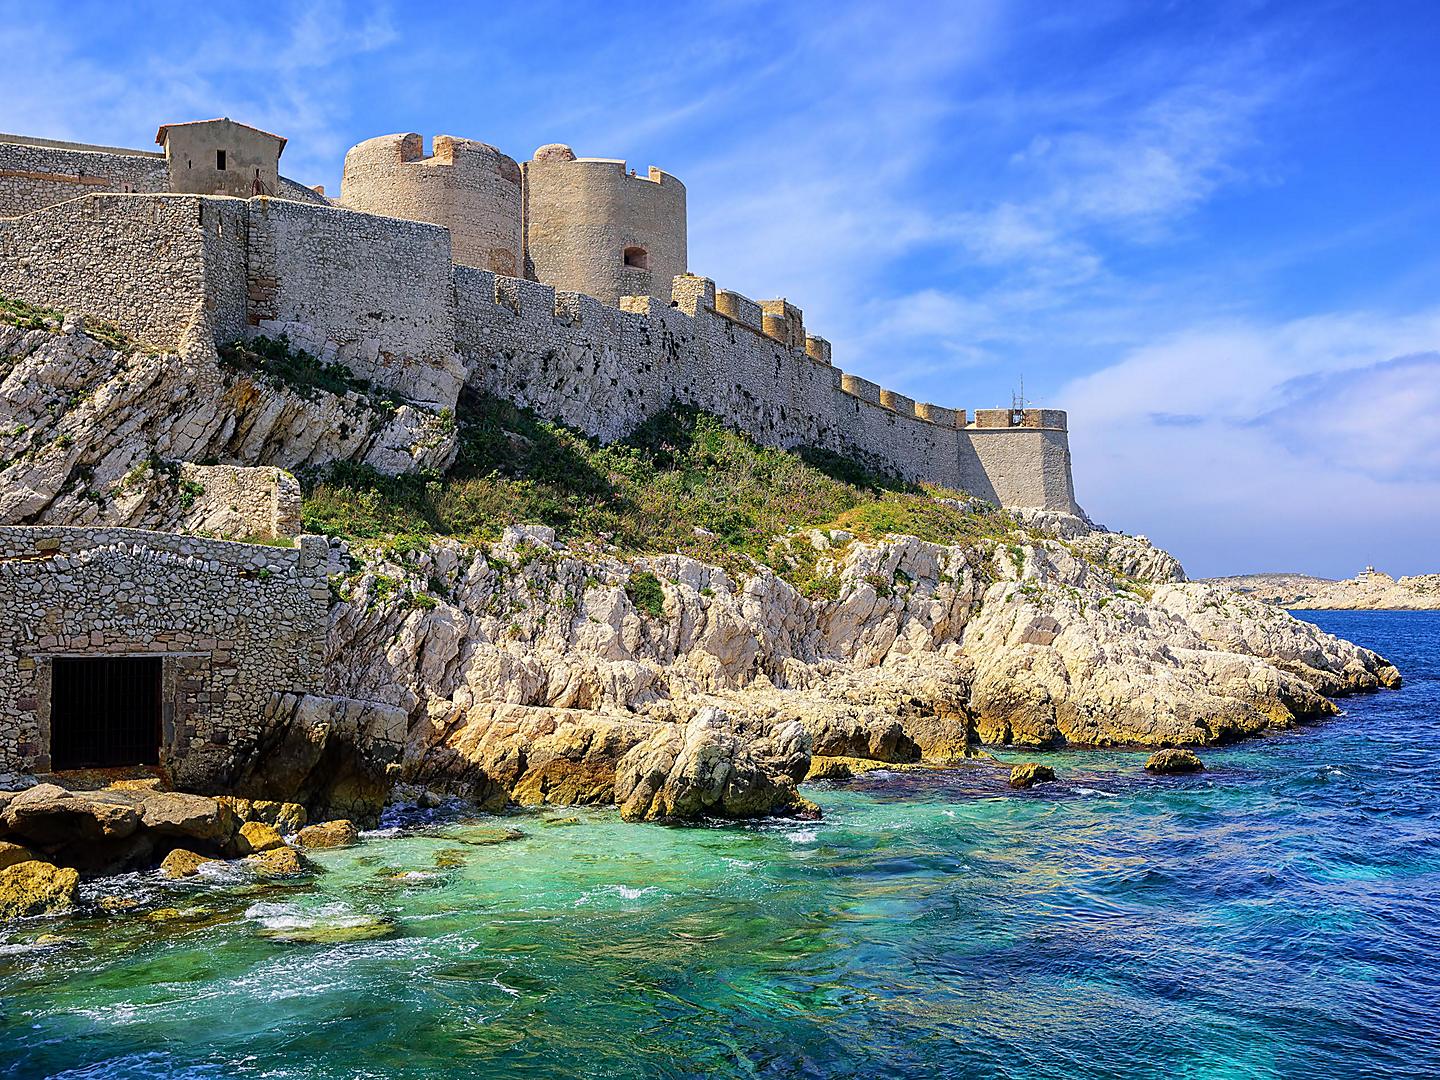 Provence (Marseille), France, Chateau d'If